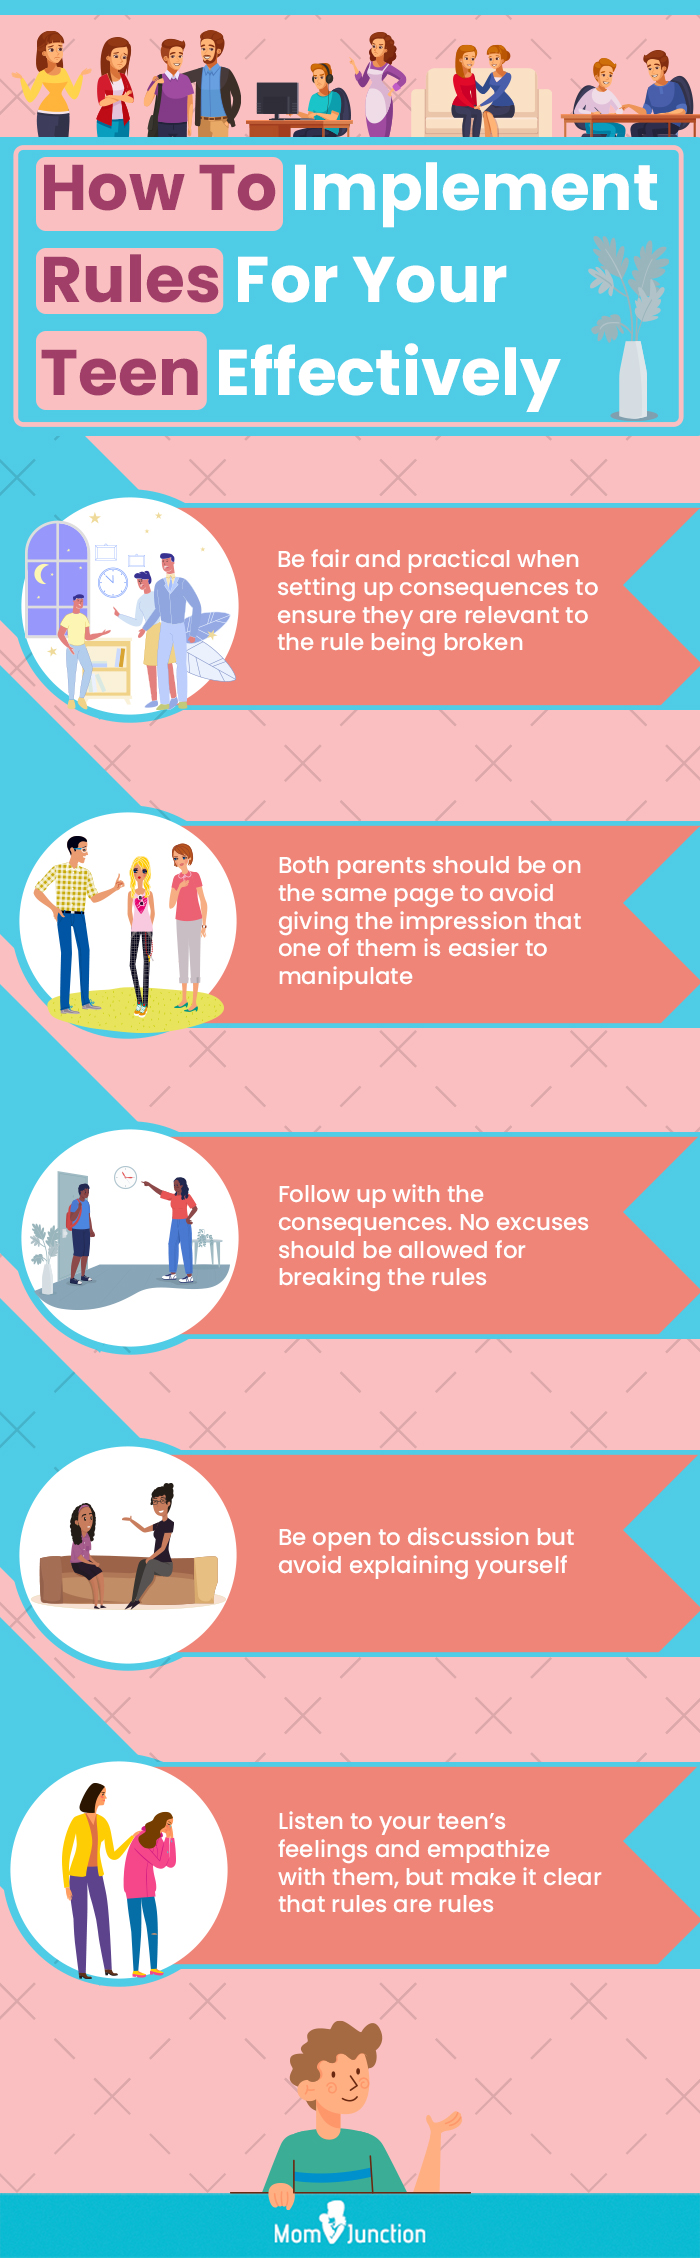 how to implement rules for your teen effectively (infographic)